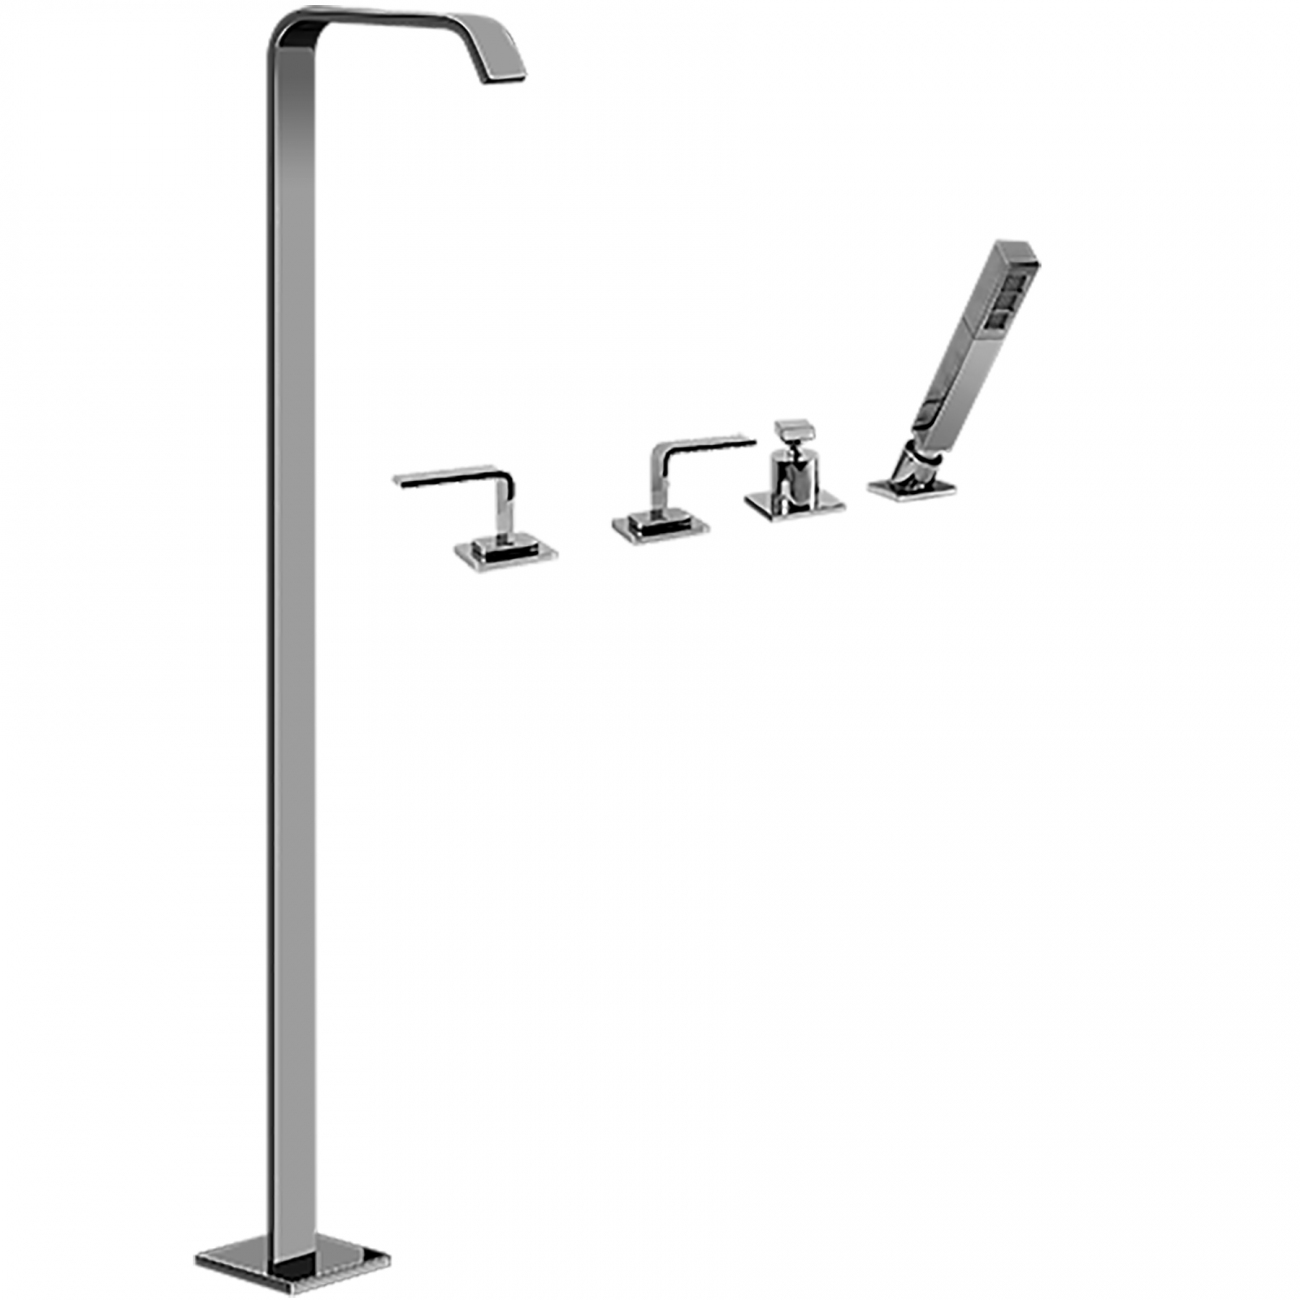 Graff Immersion floor mounted bath group